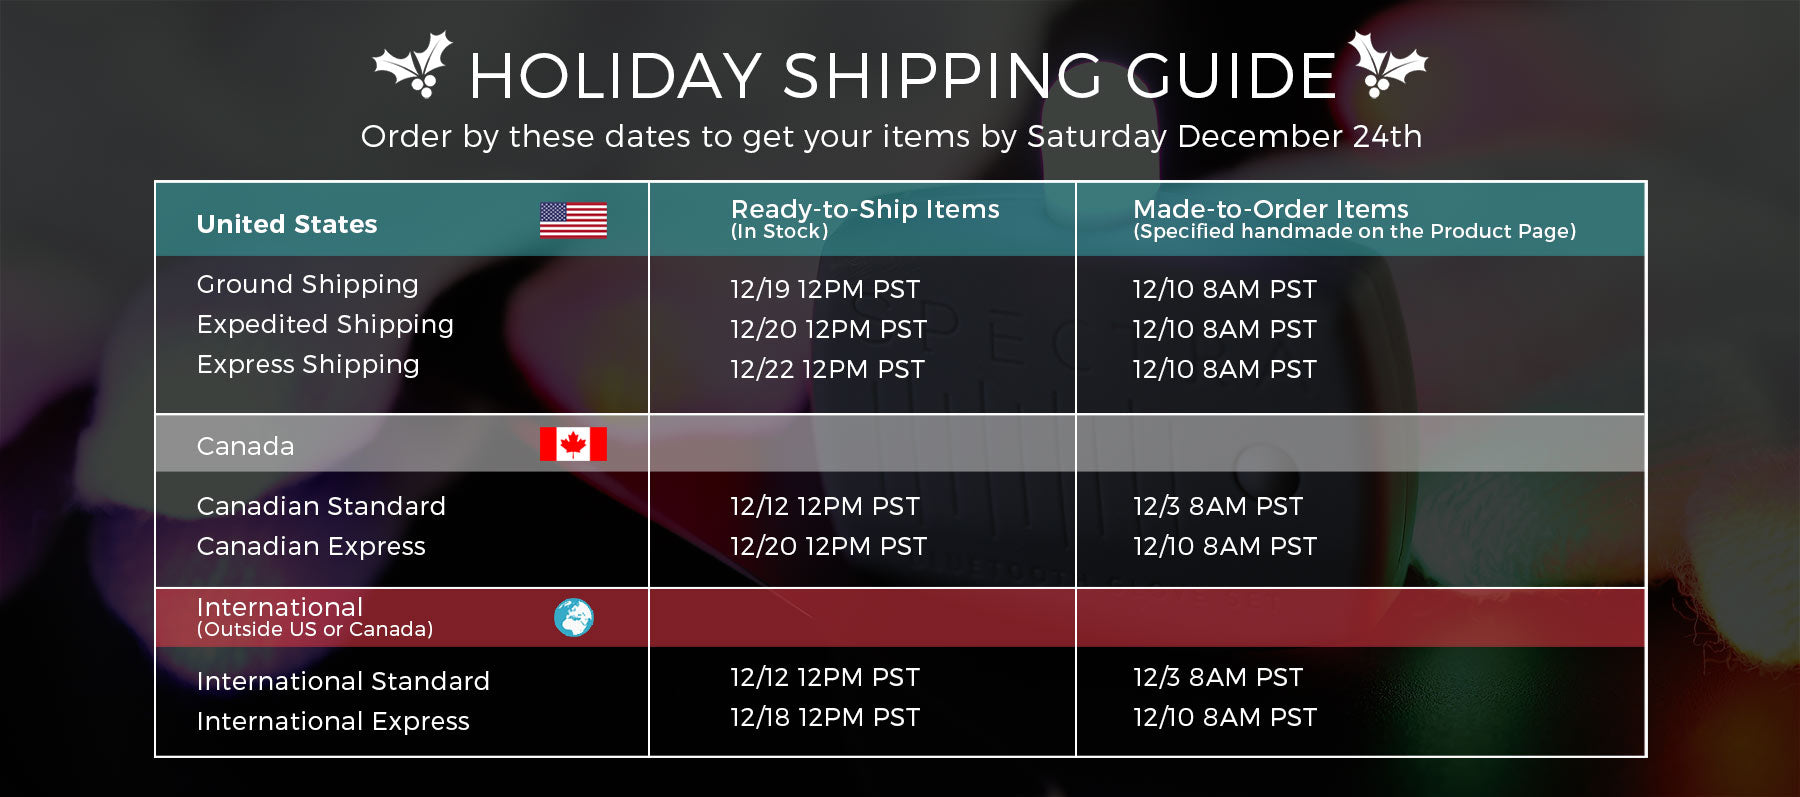 HOLIDAY SHIPPING GUIDE  - UltraPoi